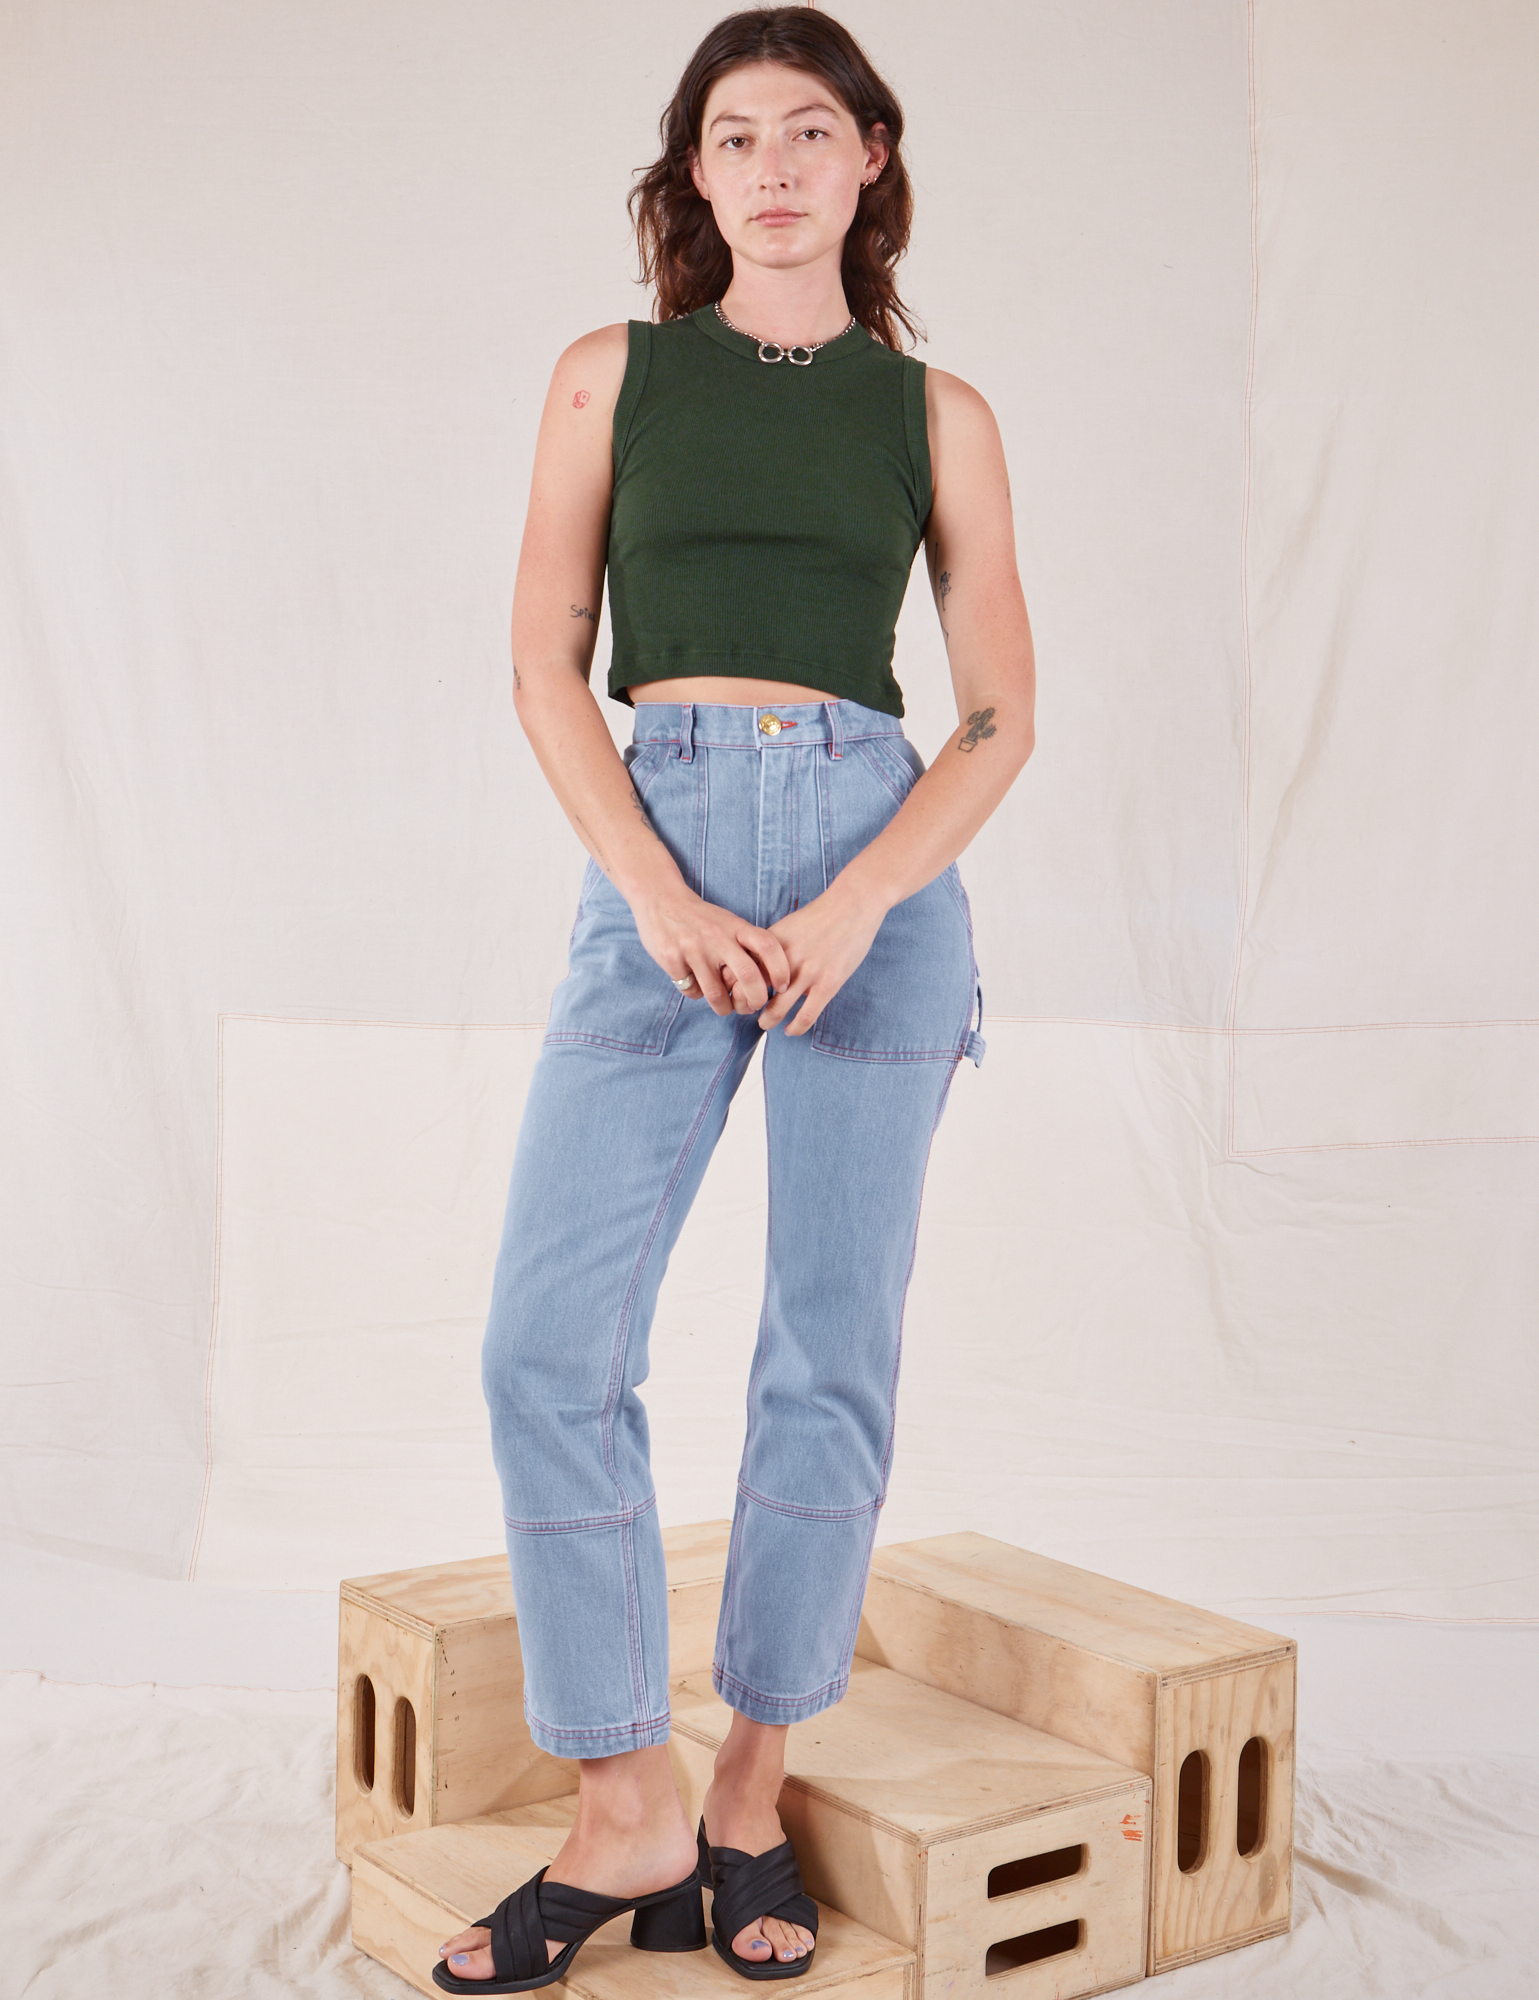 Alex is wearing Muscle Tee in Swamp Green and light wash Carpenter Jeans